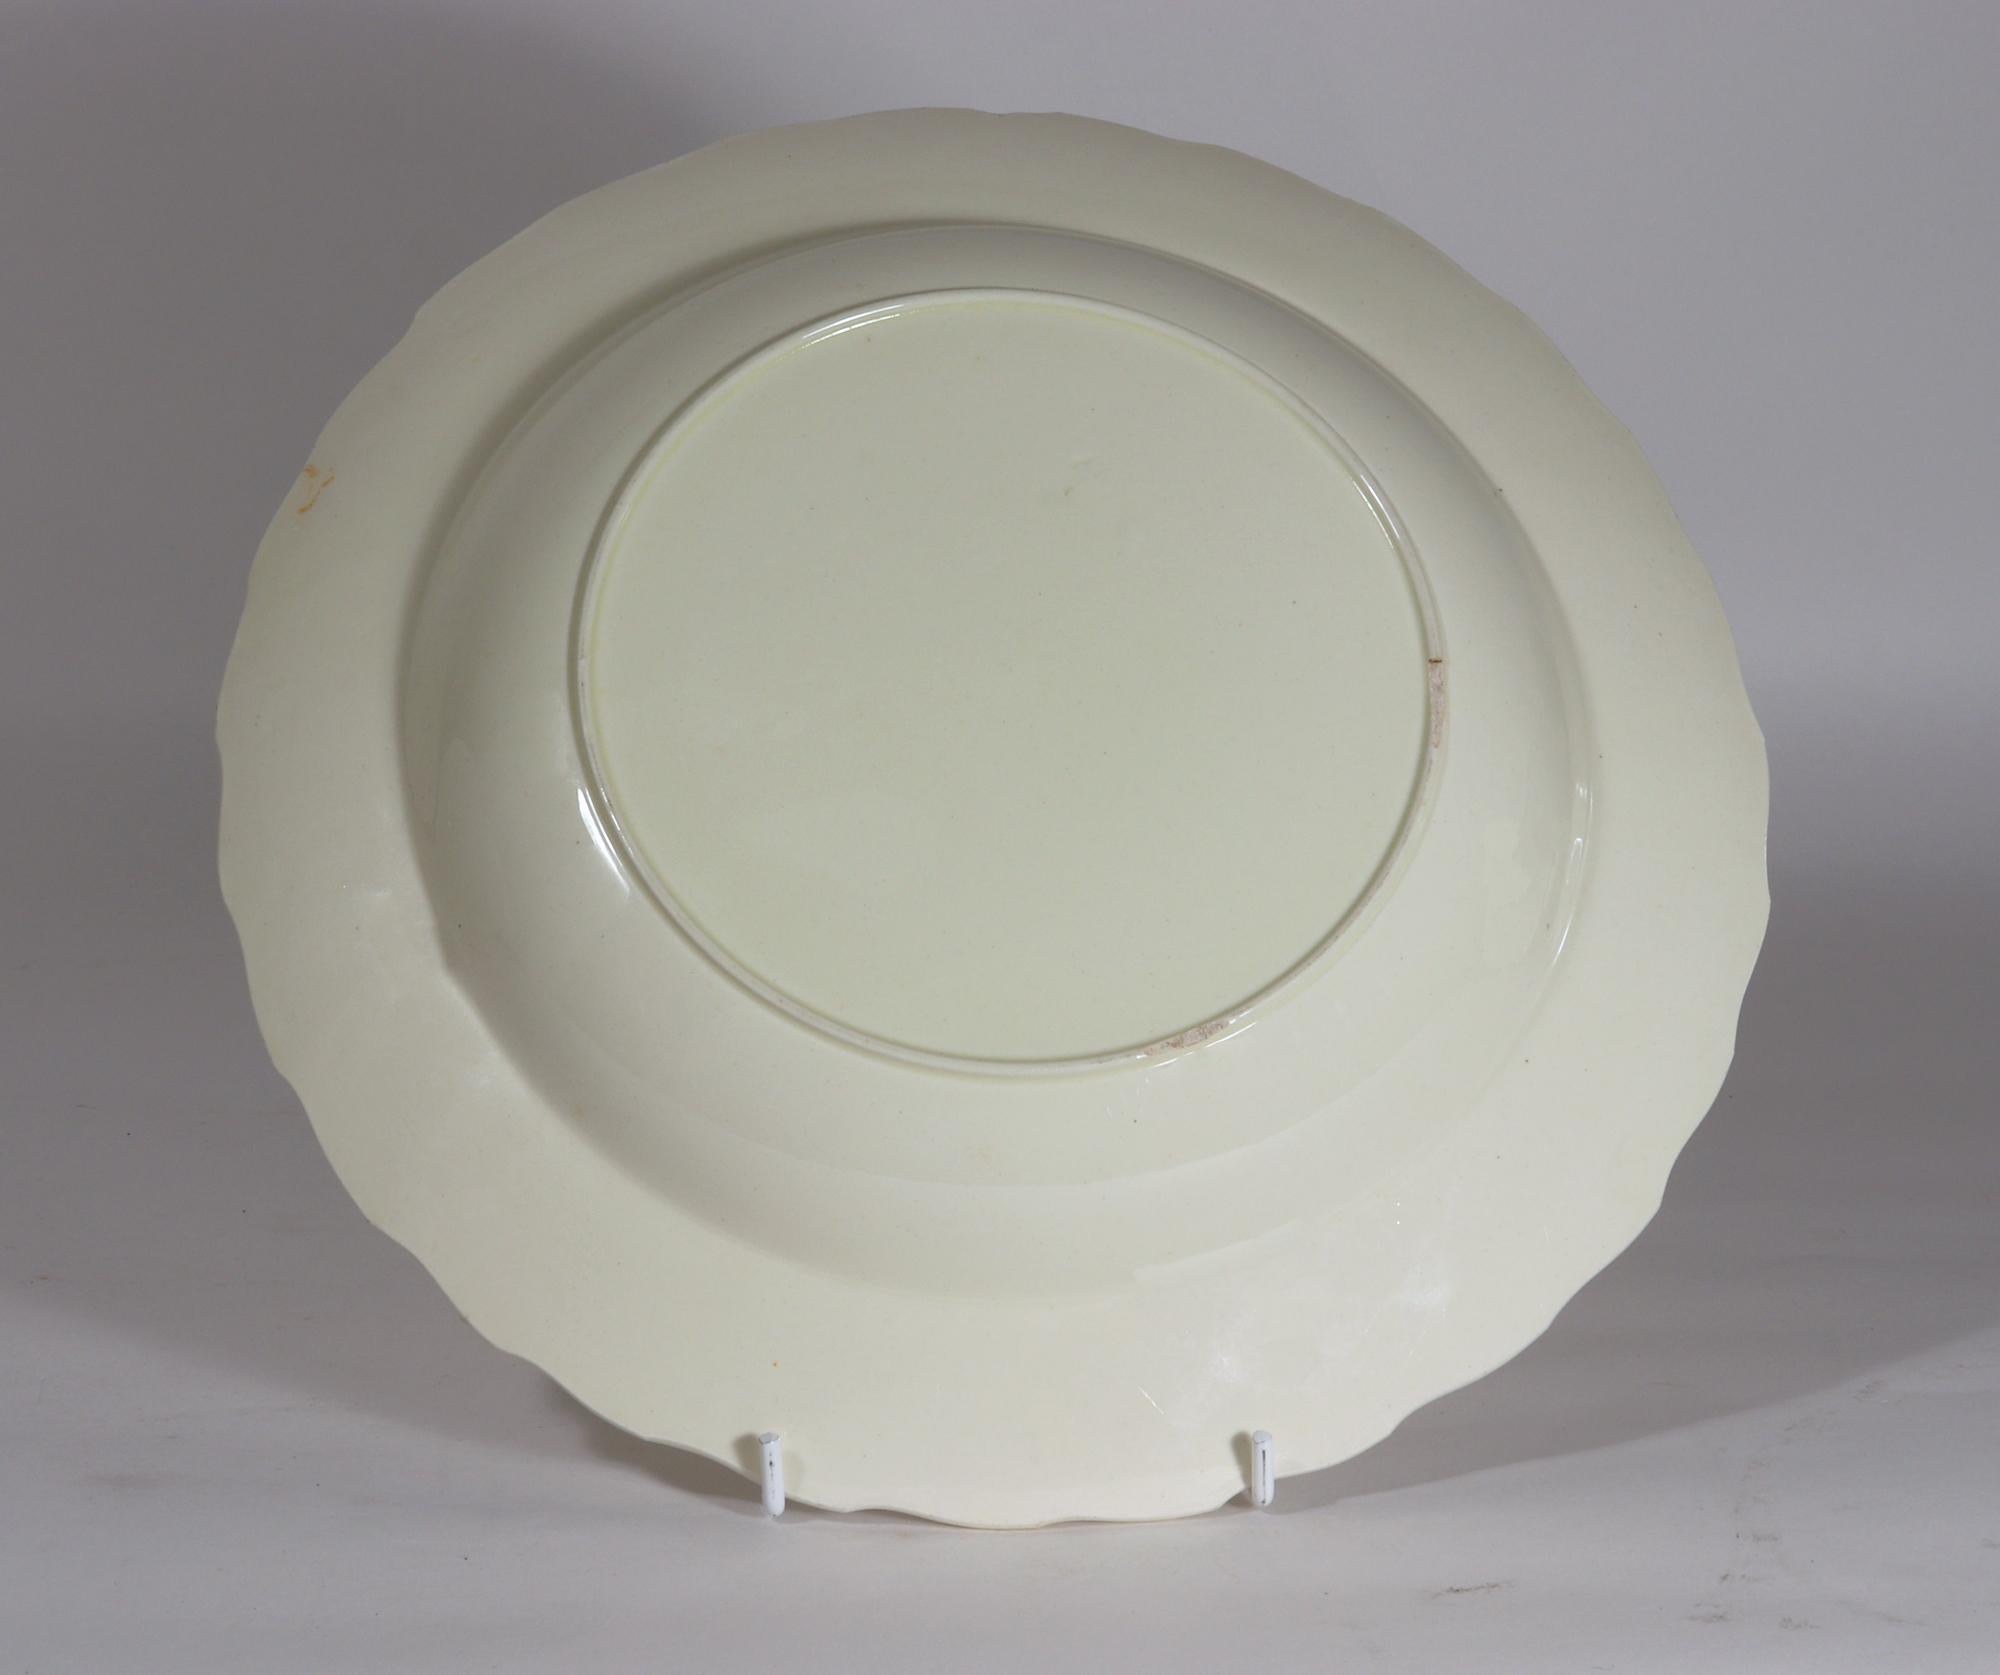 English Plain Creamware Pottery Feather-edge Soup Plates,
Set of Six,
Circa 1785

The set of six creamware large soup plates are in plain creamware with a lovely rich cream colour with a deep central bowl   The borders with a continuous feather-edge